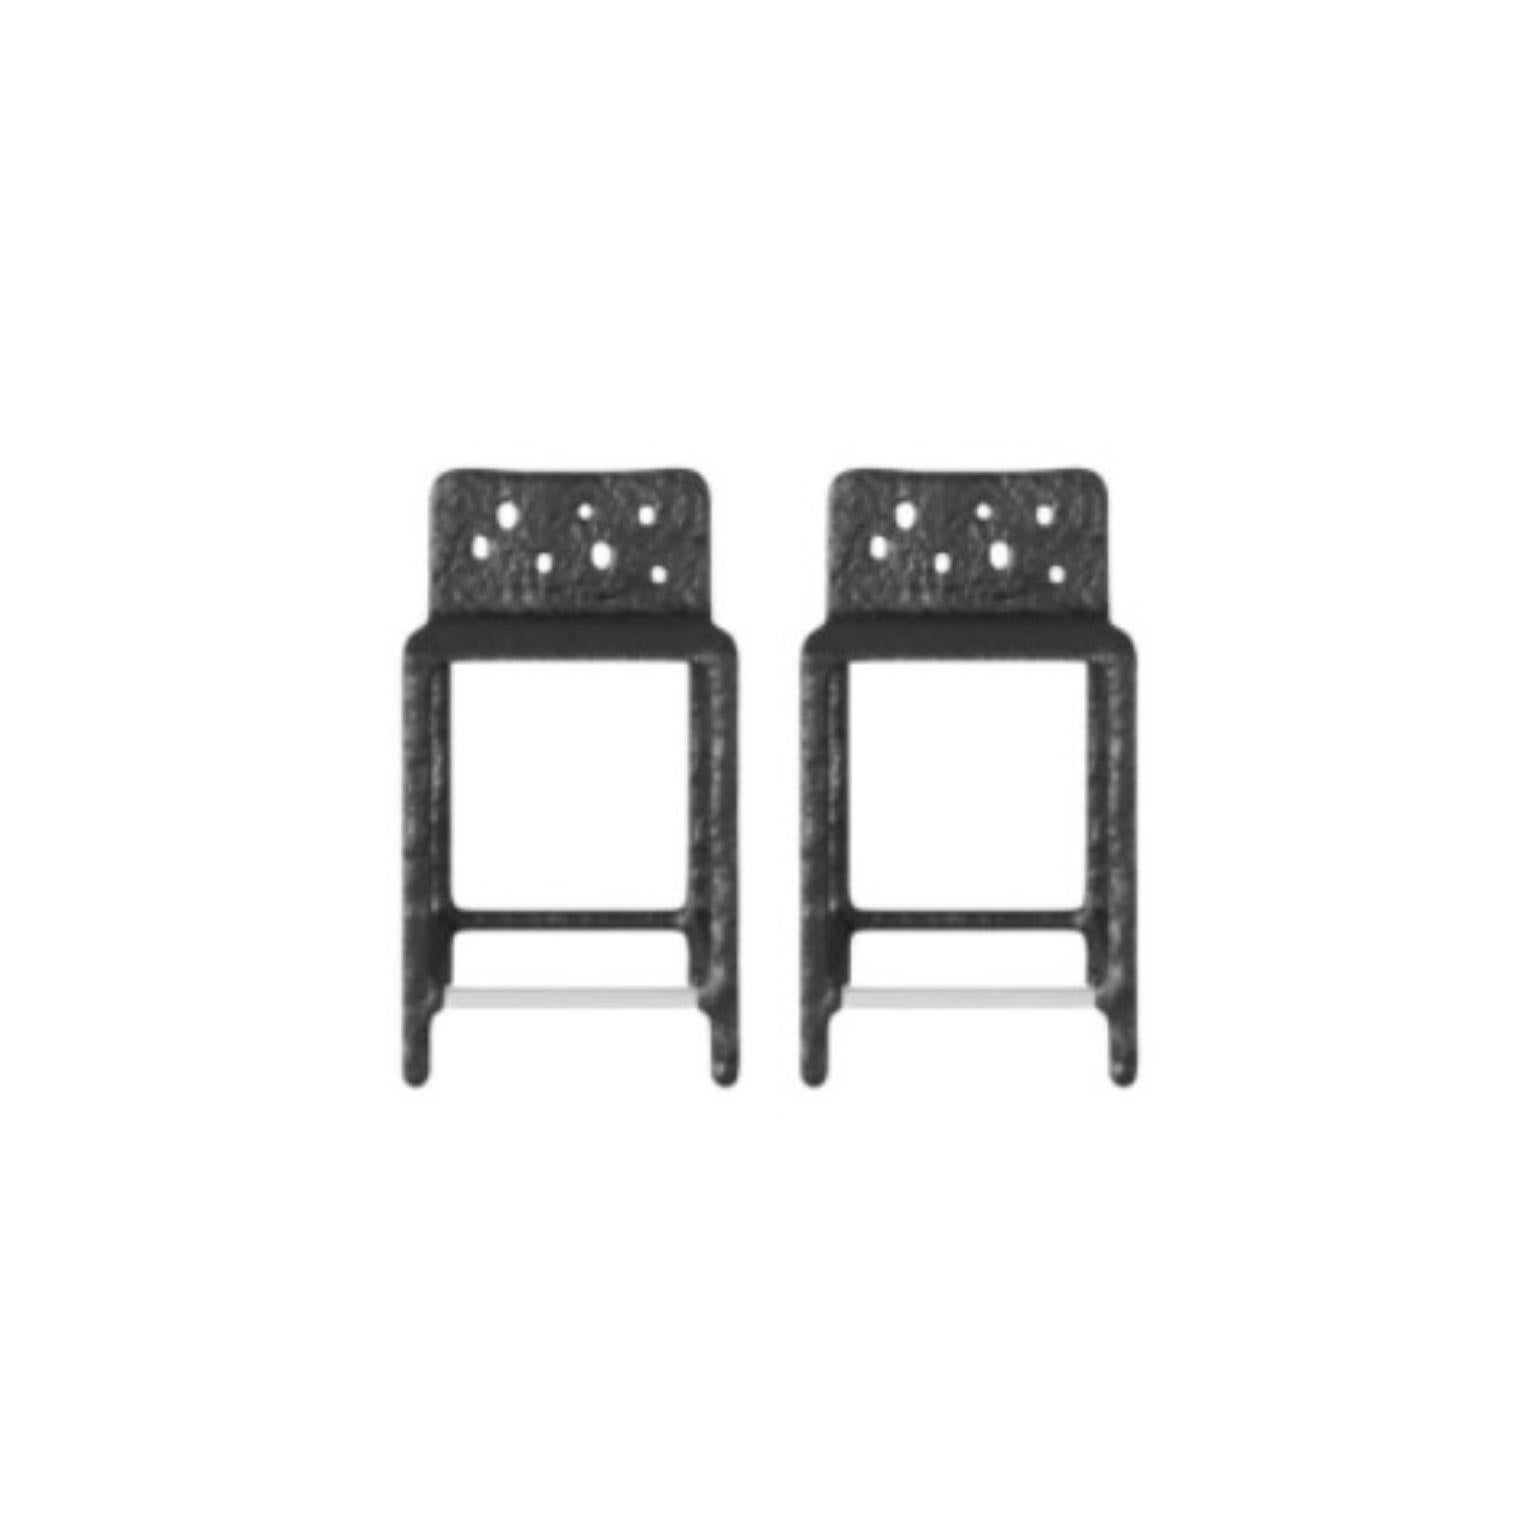 Set of 2 outdoor black sculpted contemporary half-bar stools by Faina
Design: Victoriya Yakusha
Material: steel, flax rubber, biopolymer, cellulose
Dimensions: W 46 x D 47 x H 84 cm


The plastic silhouette and slightly primitive form of